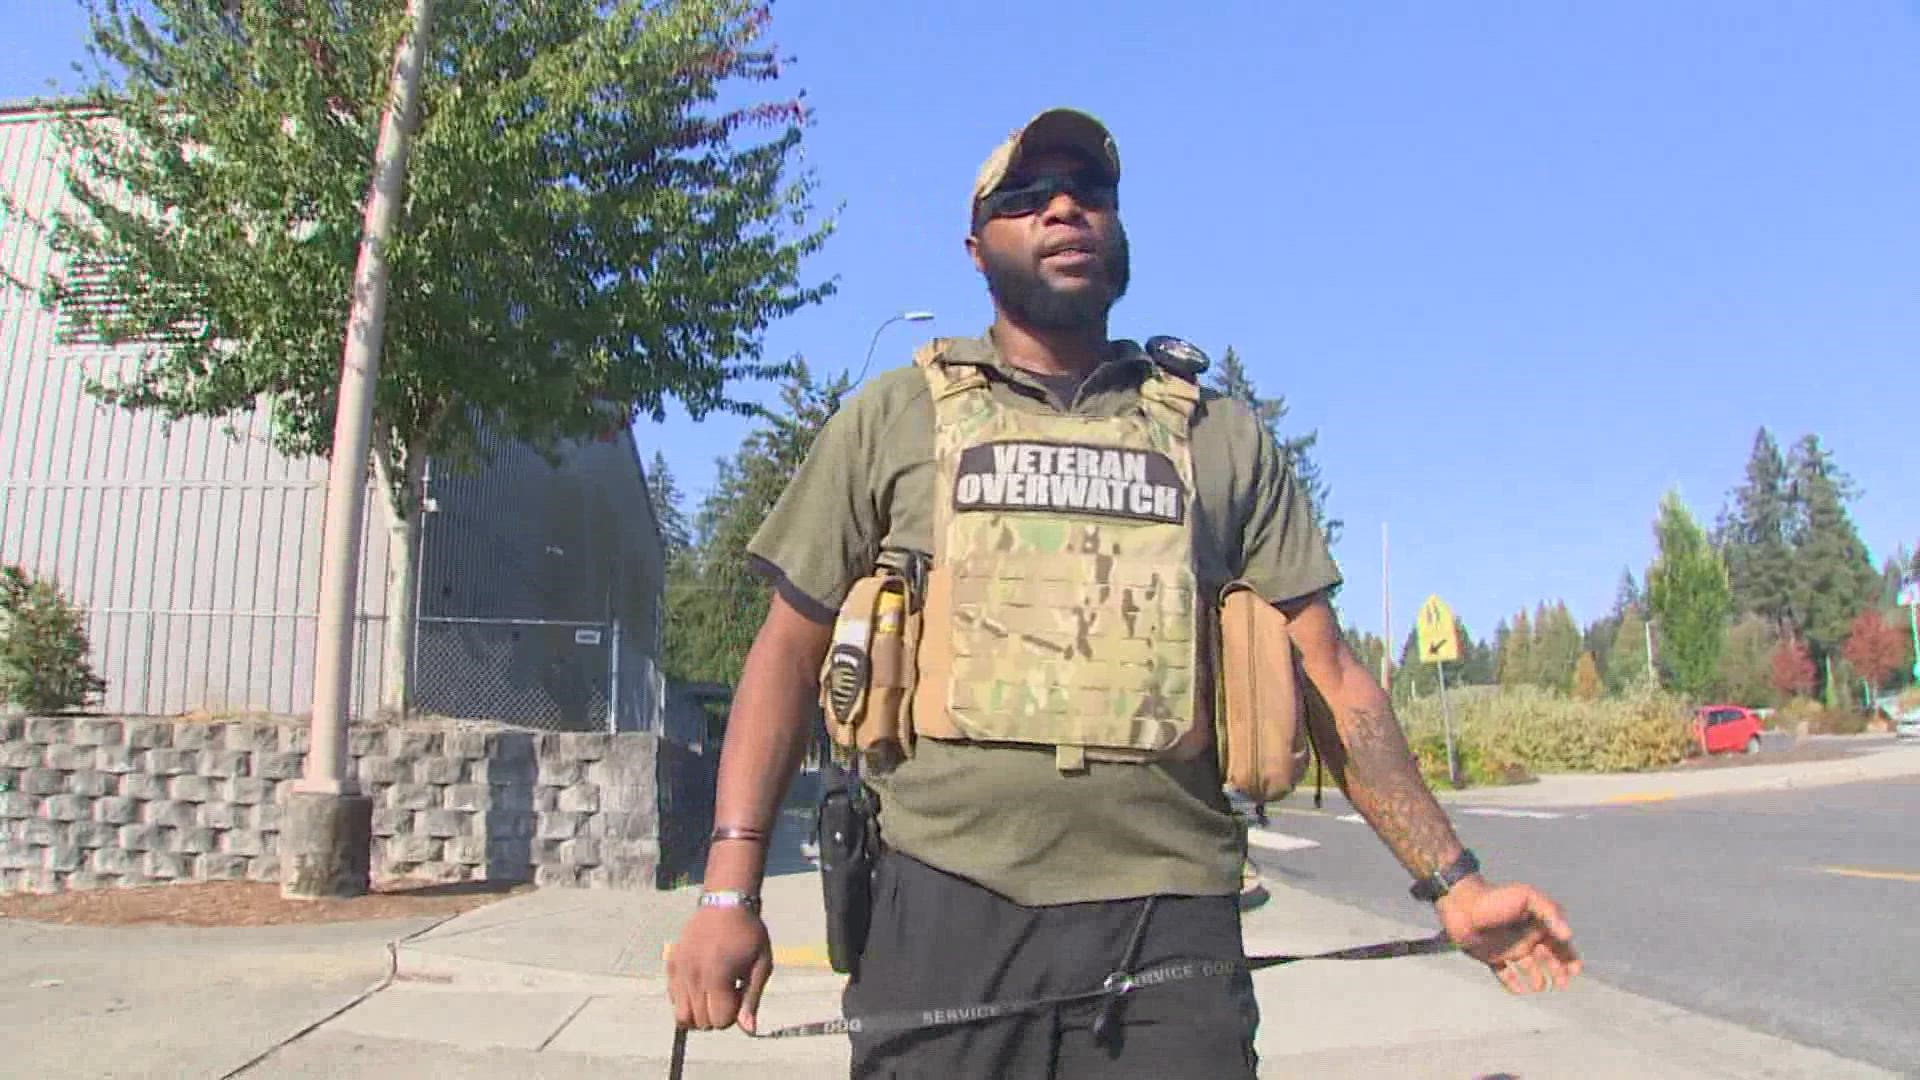 The North Thurston School District said they have had a "handful" of complaints about Anthony Triplett patrolling in school neighborhoods while armed.